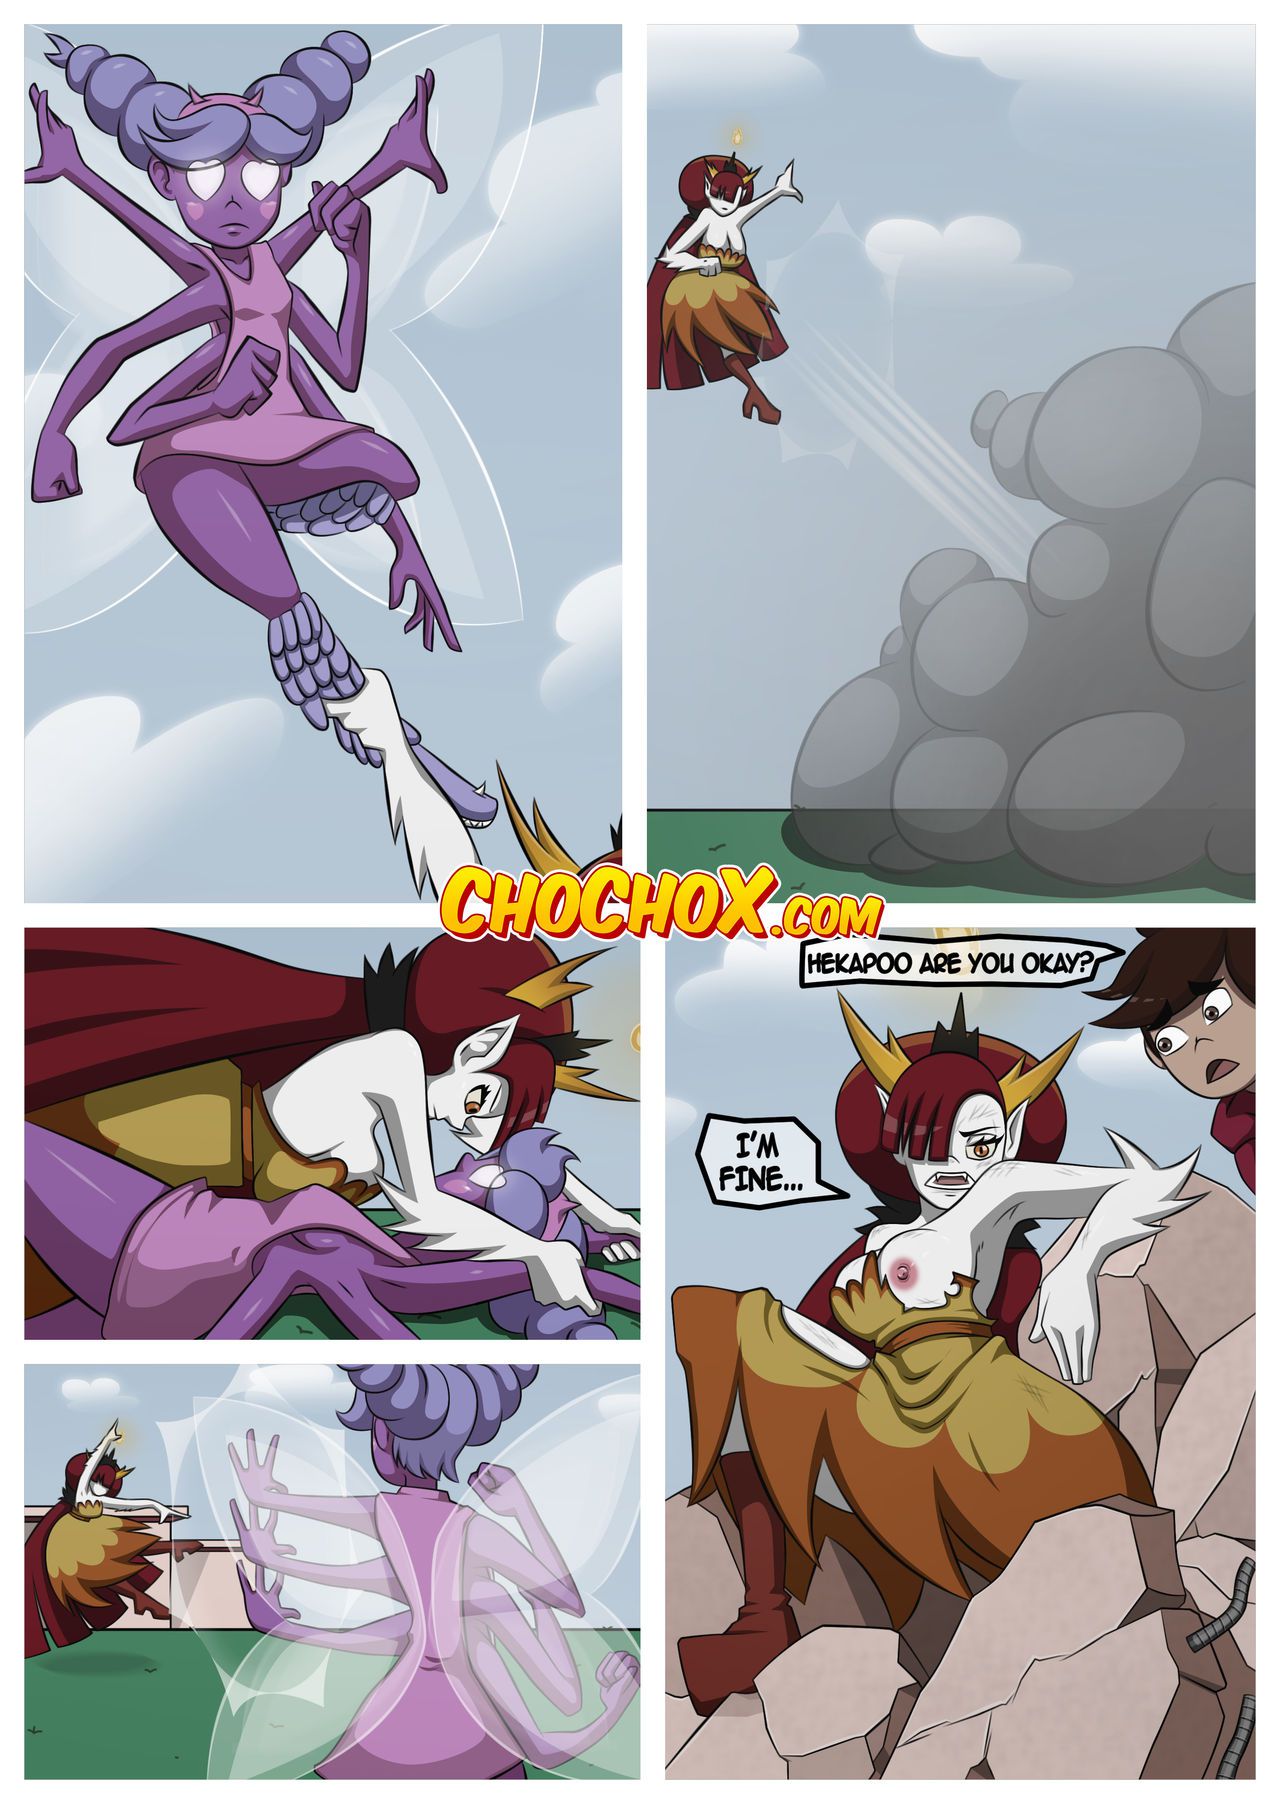 [Crock Comix] Hekapoo Plan’s - Sexberty 1 [ChoChoX] (Star Vs. The Forces of Evil) 7